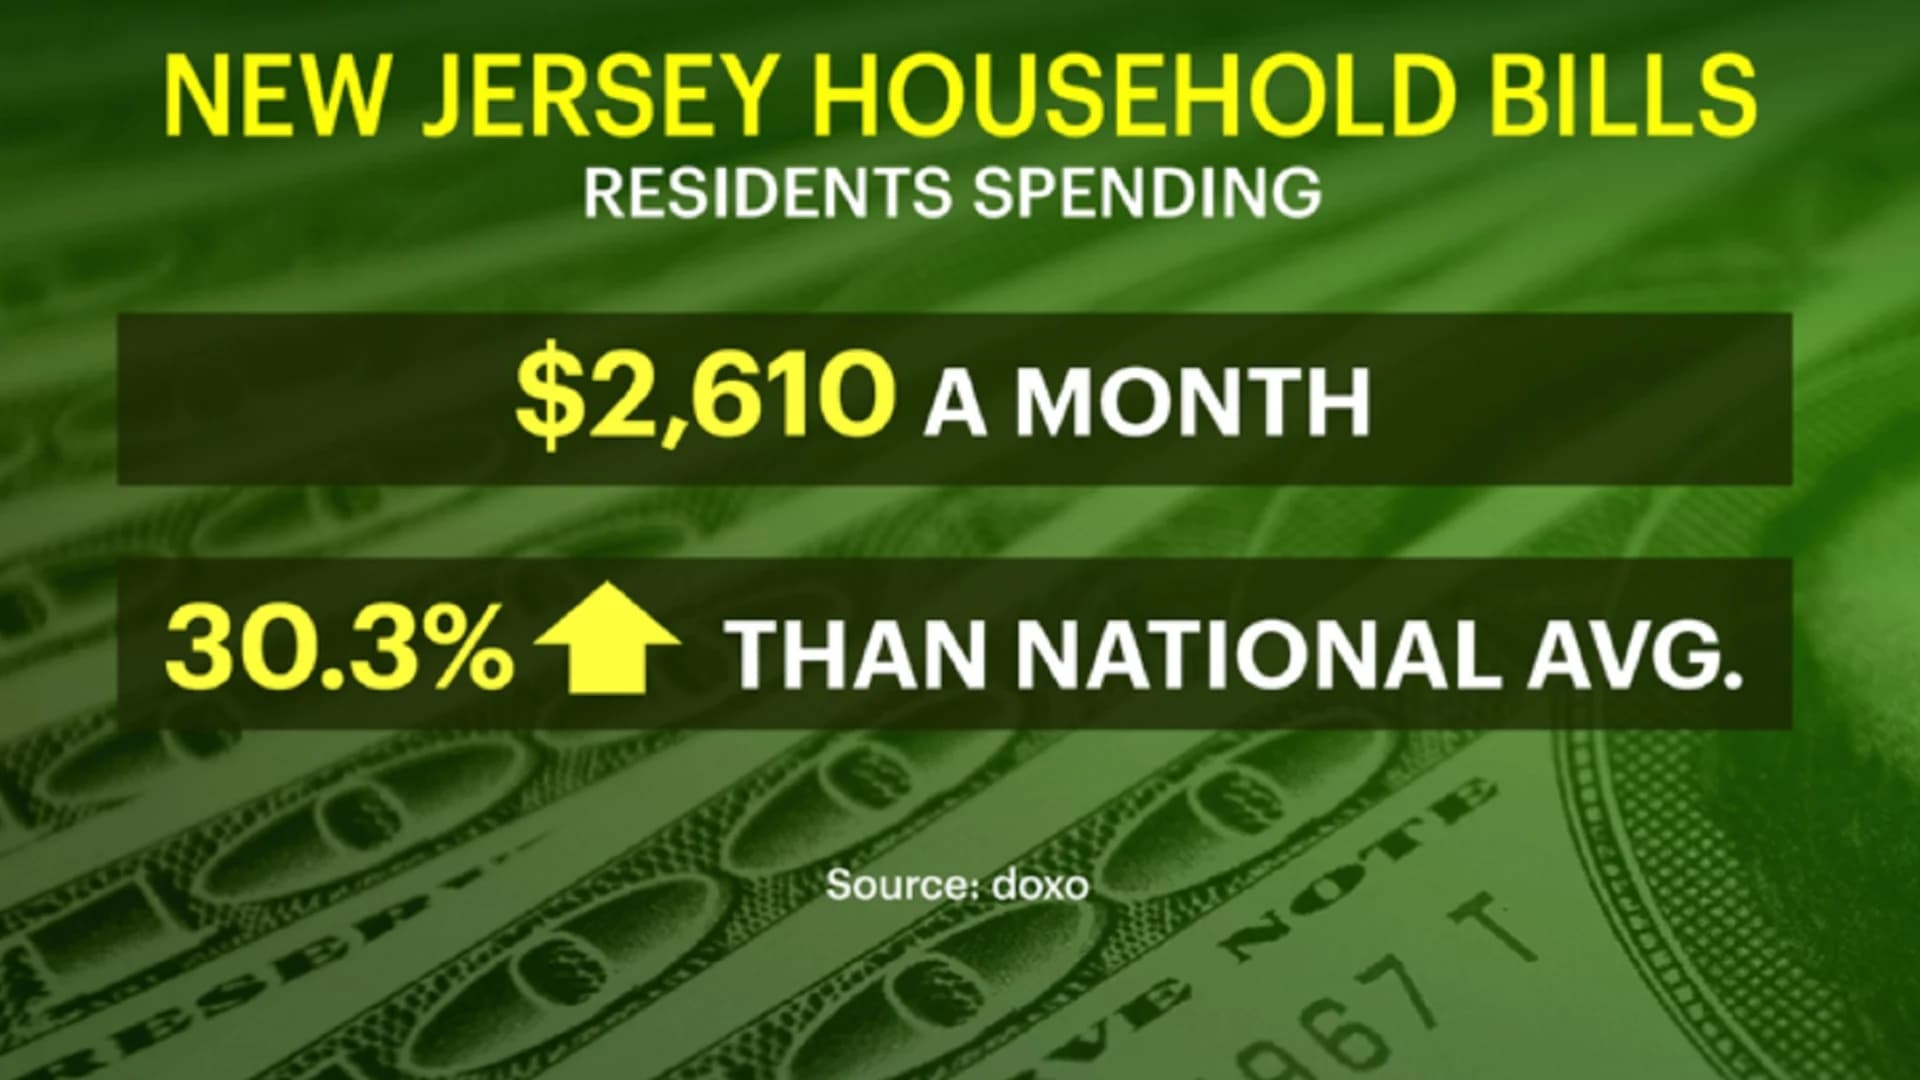 Surprised? New Jersey ranks 3rd most expensive state for household bills, report says